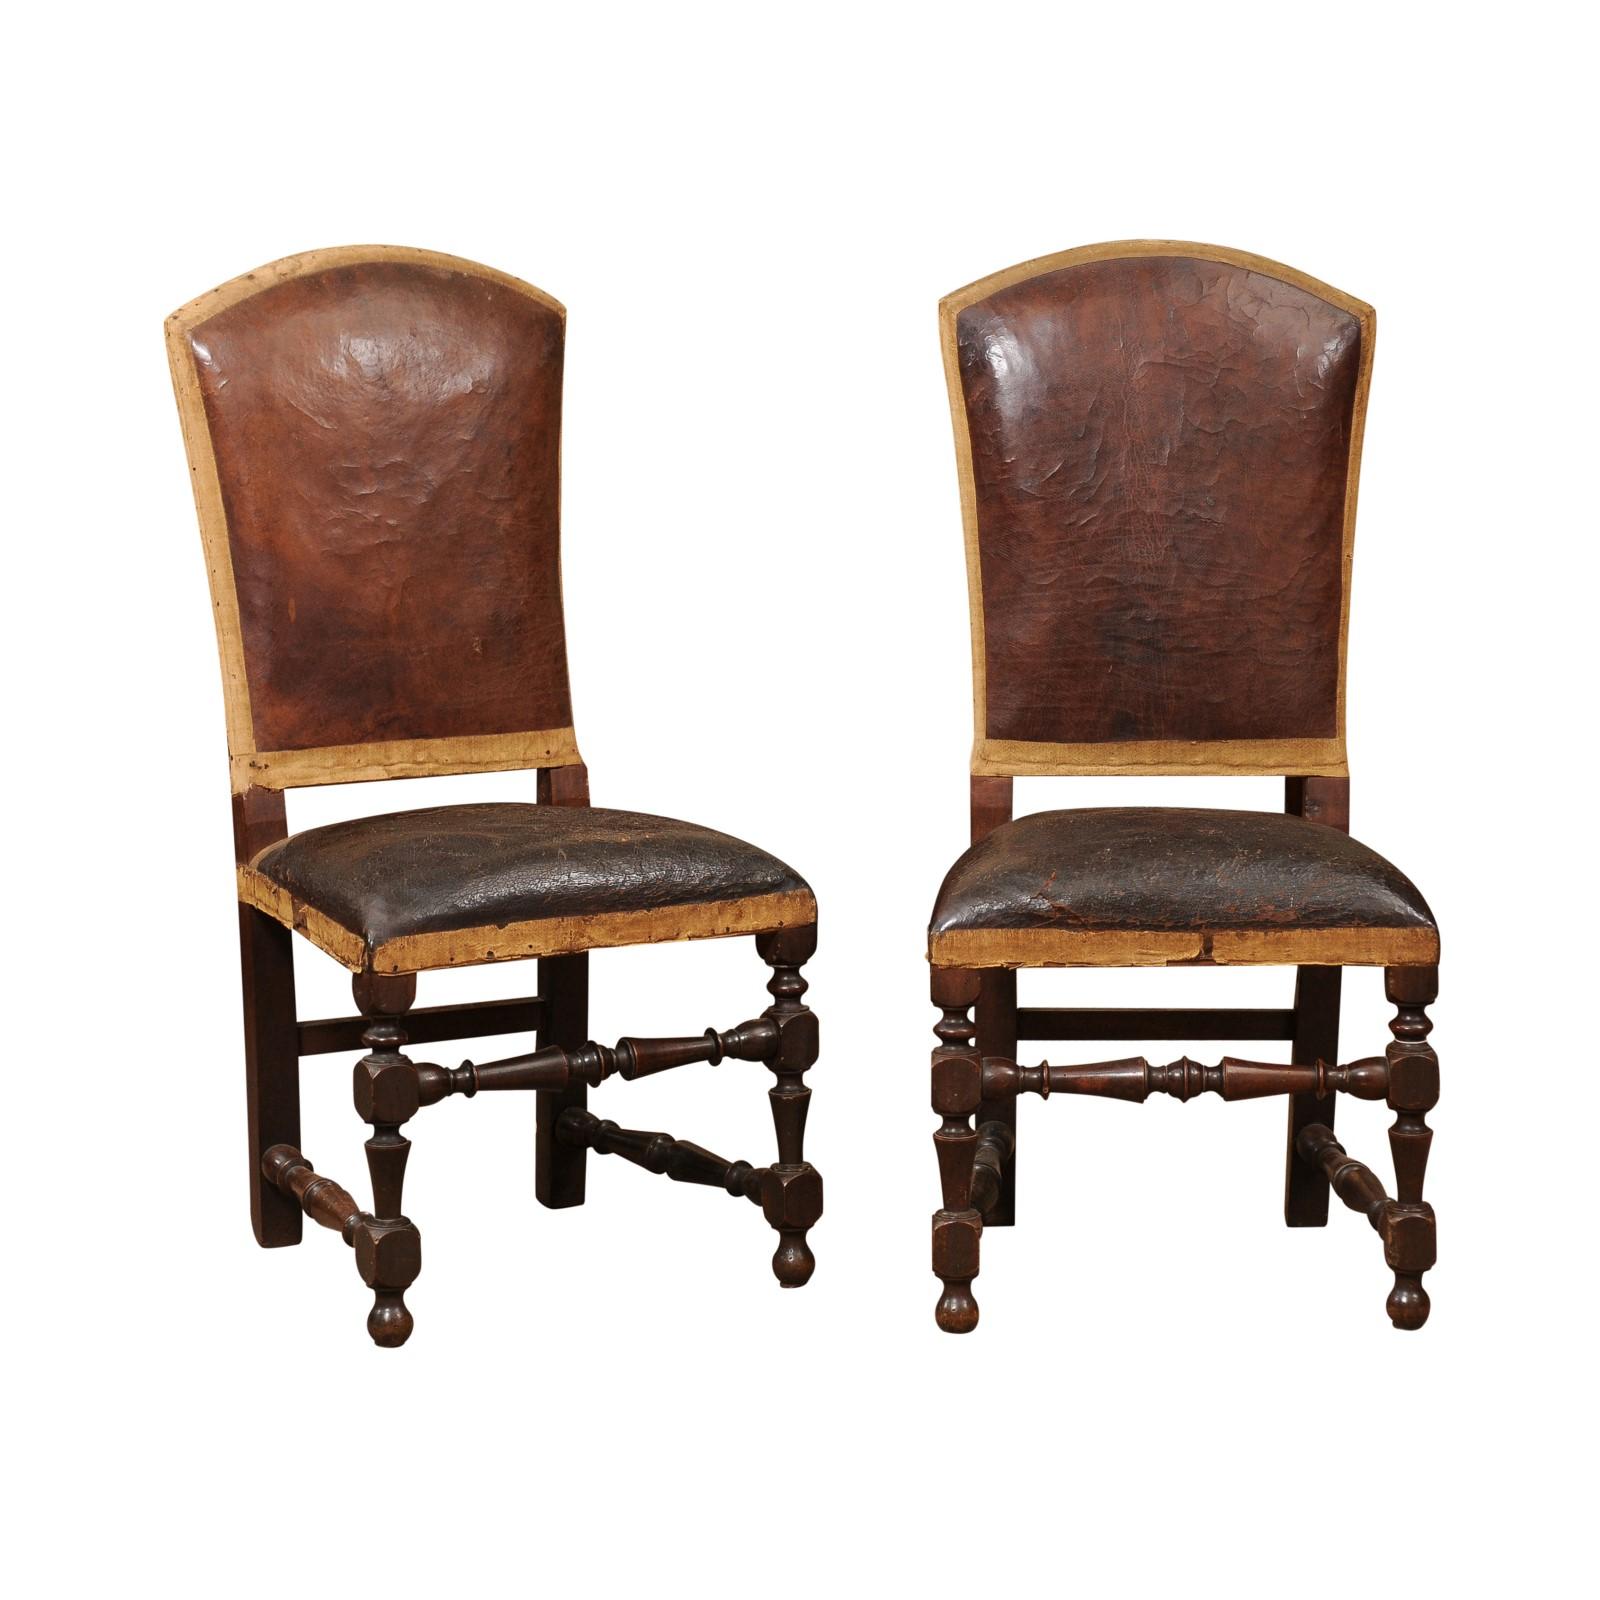 Pair of Large 18th Century Italian Walnut Hall Chairs with Leather Upholstery & Turned Legs